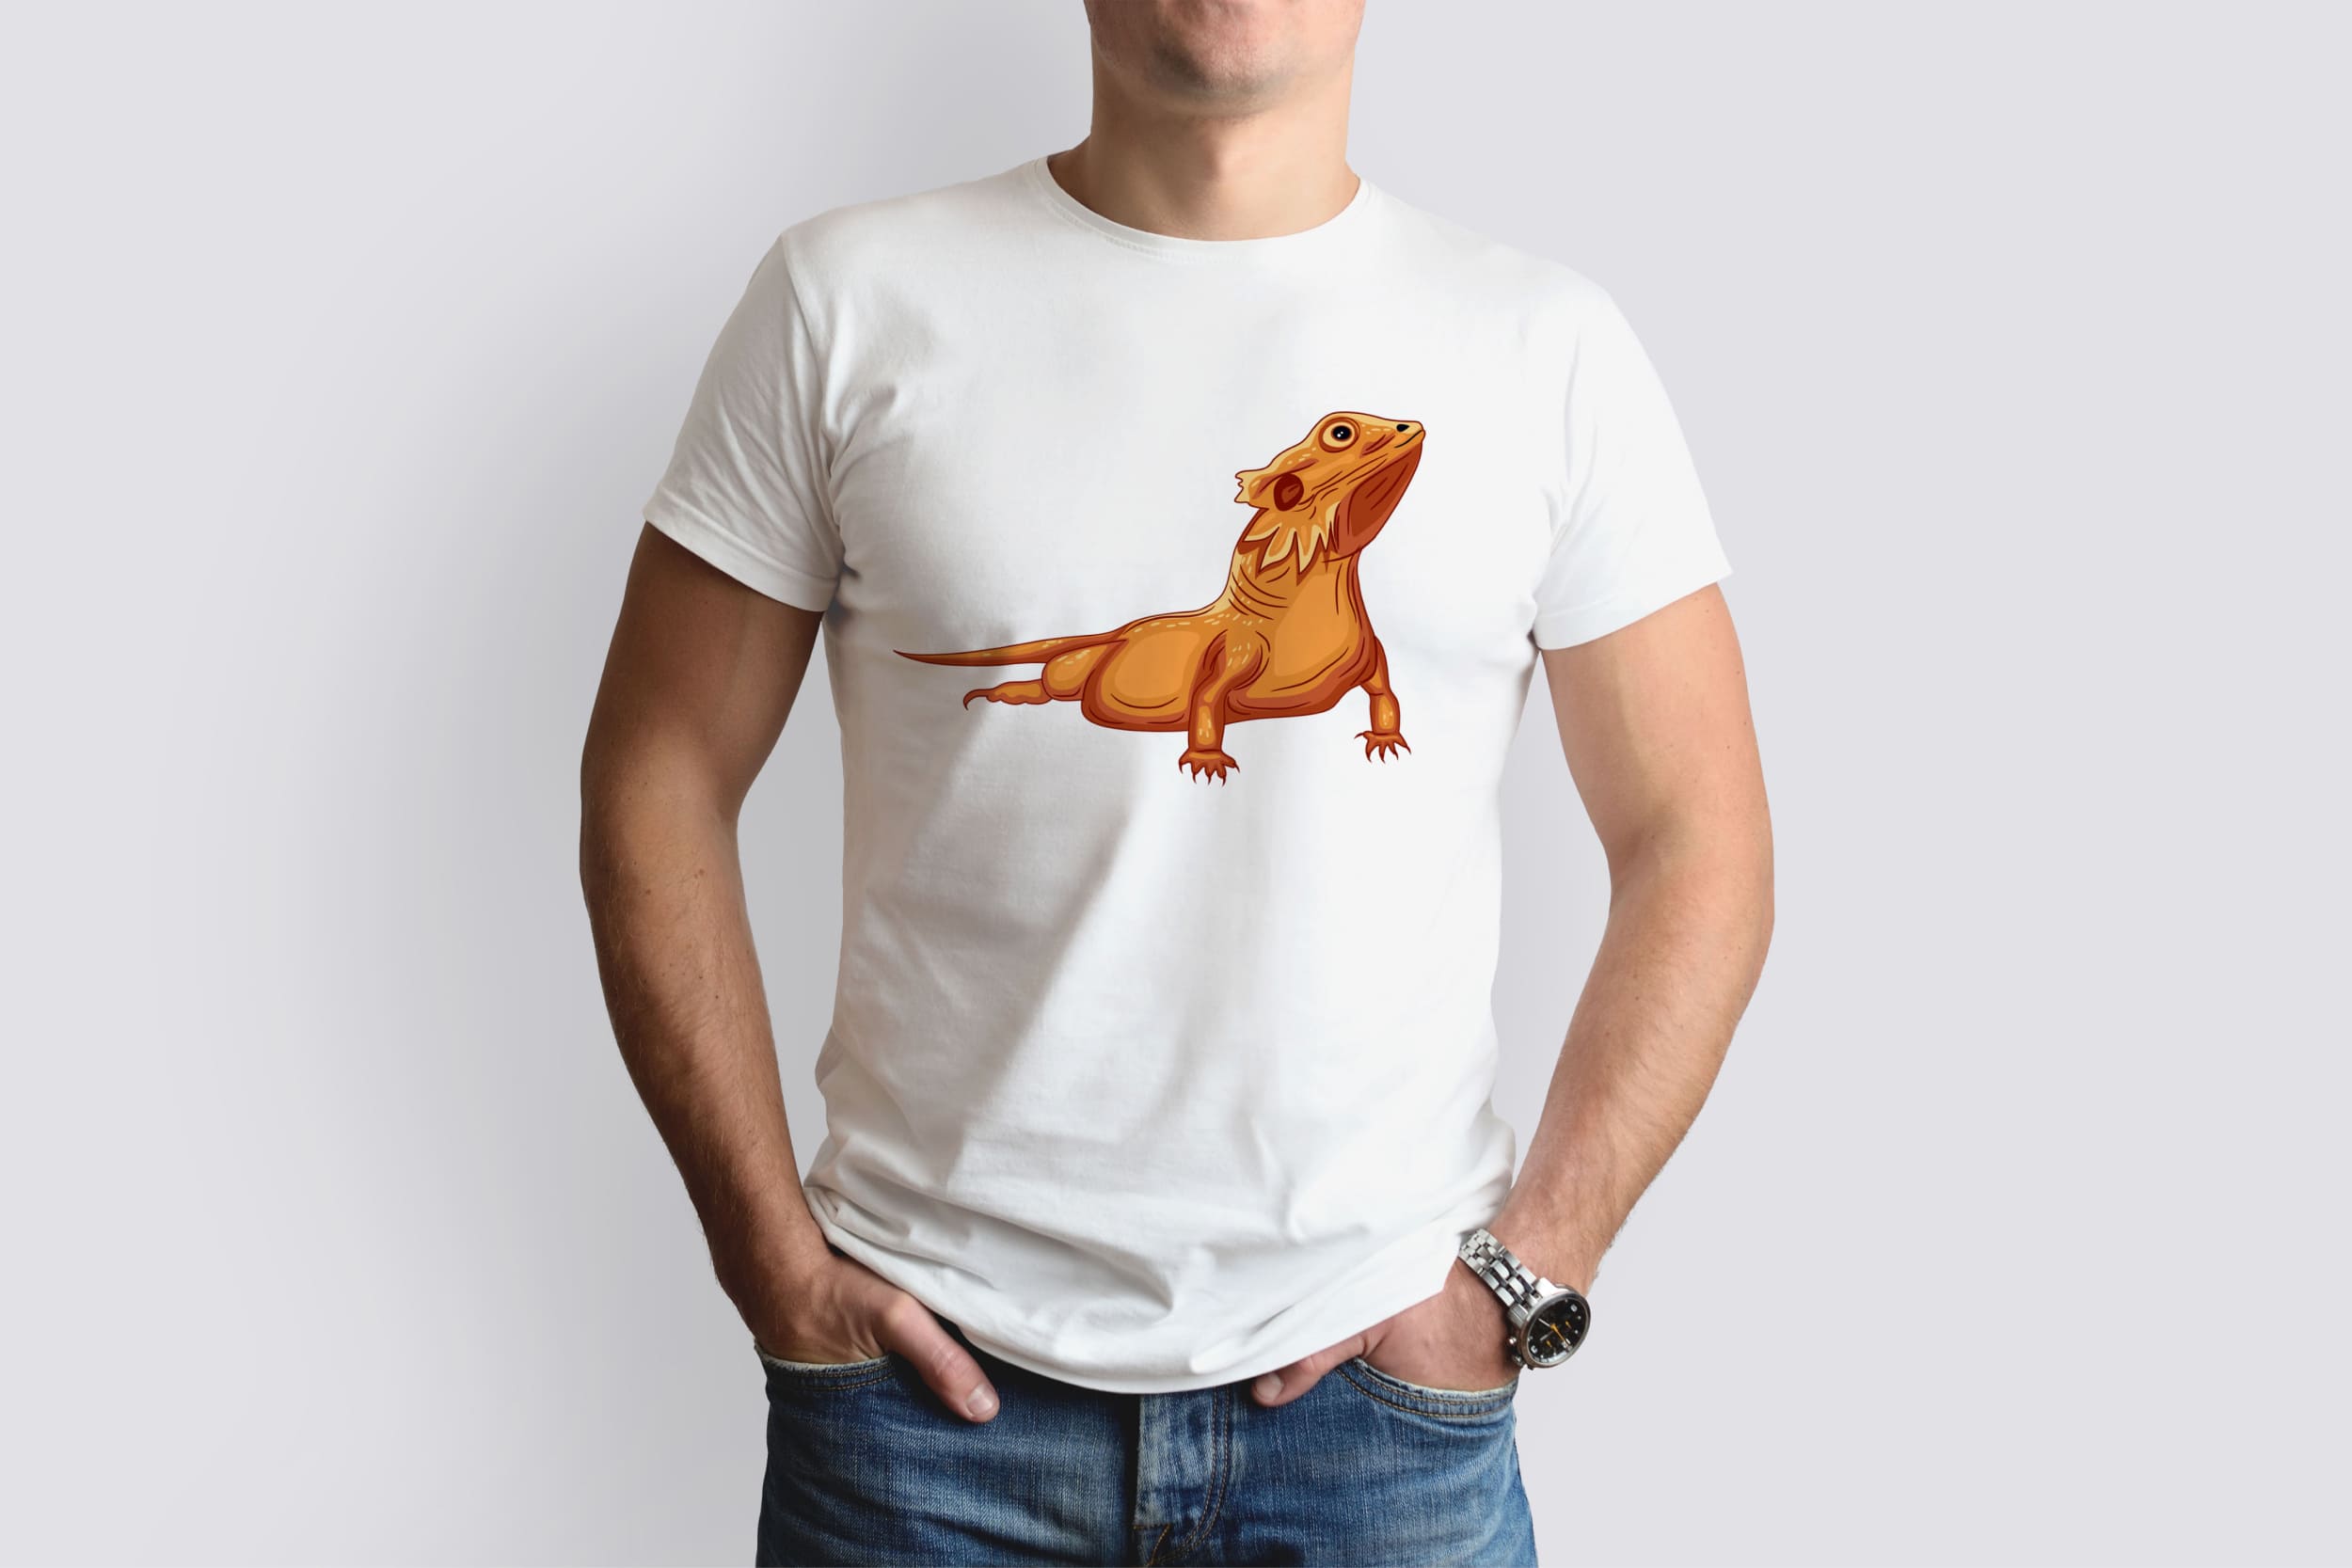 A white t-shirt on a man with an image of a orange bearded dragon.